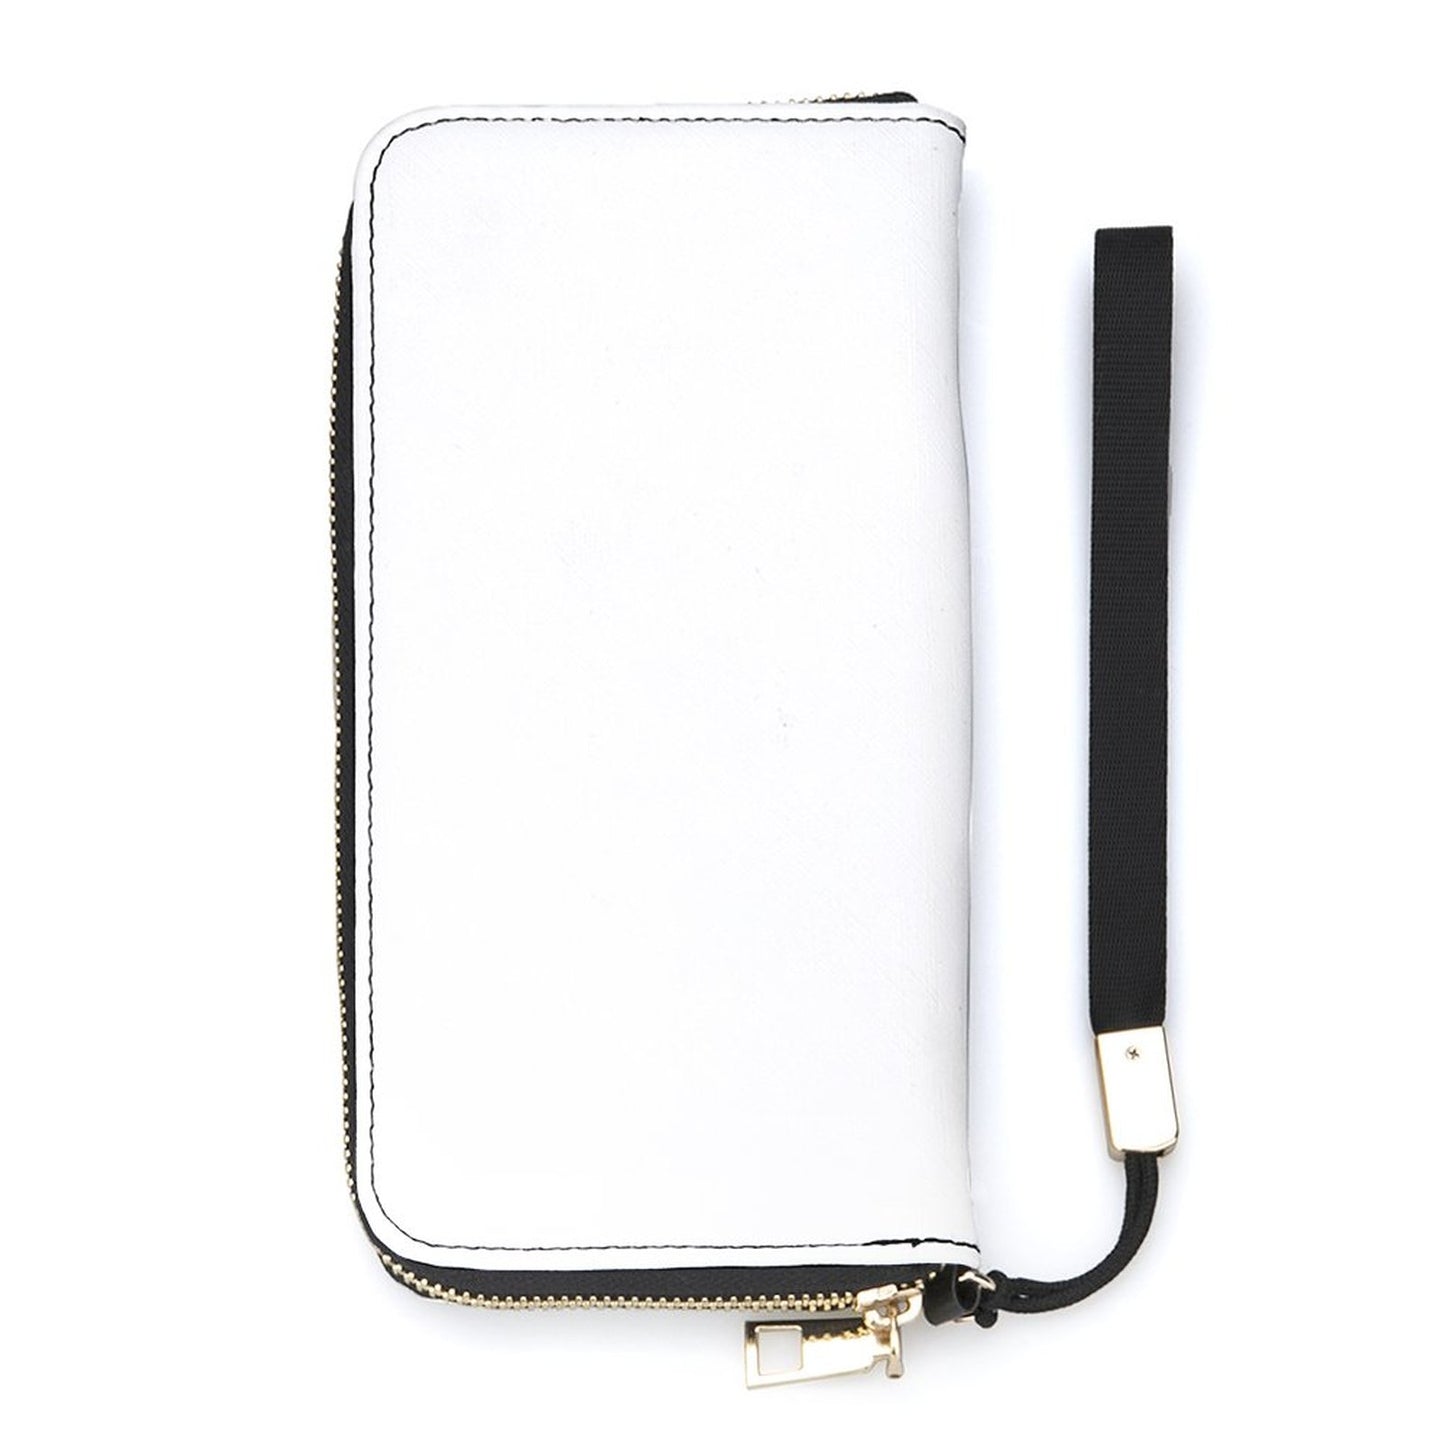 Personalize Your Own Purse Wallet with Strap